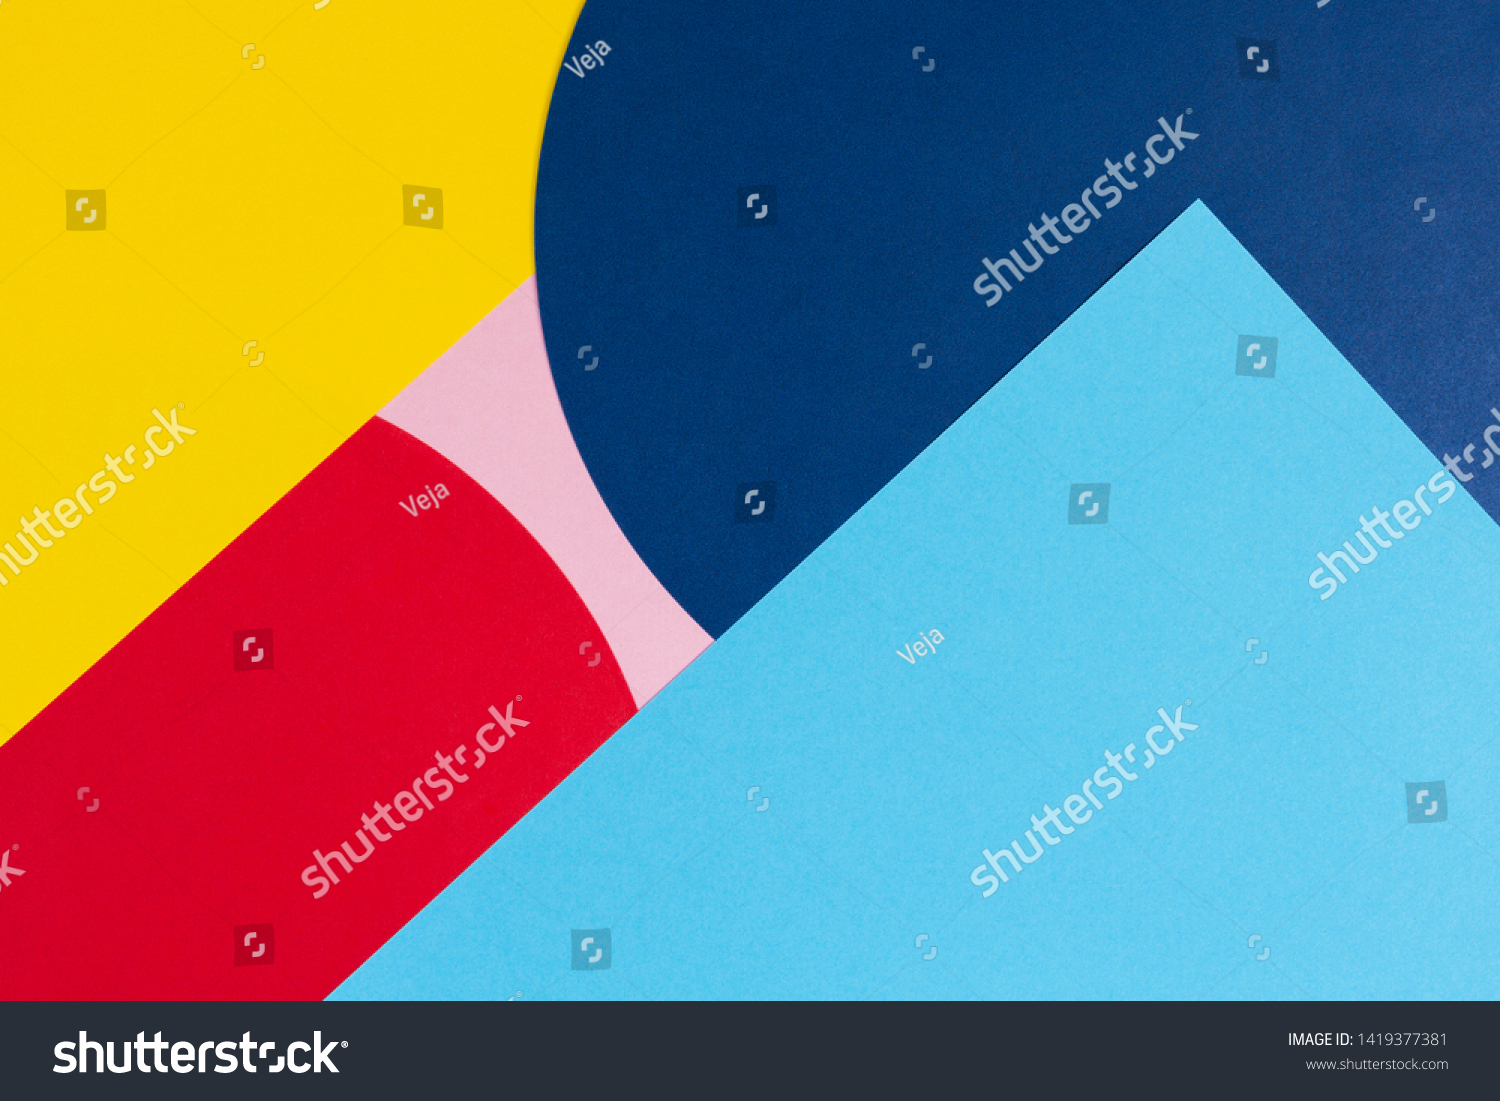 Texture background of fashion papers in memphis geometry style. Yellow, blue, light blue, red and pastel pink colors. Top view, flat lay #1419377381